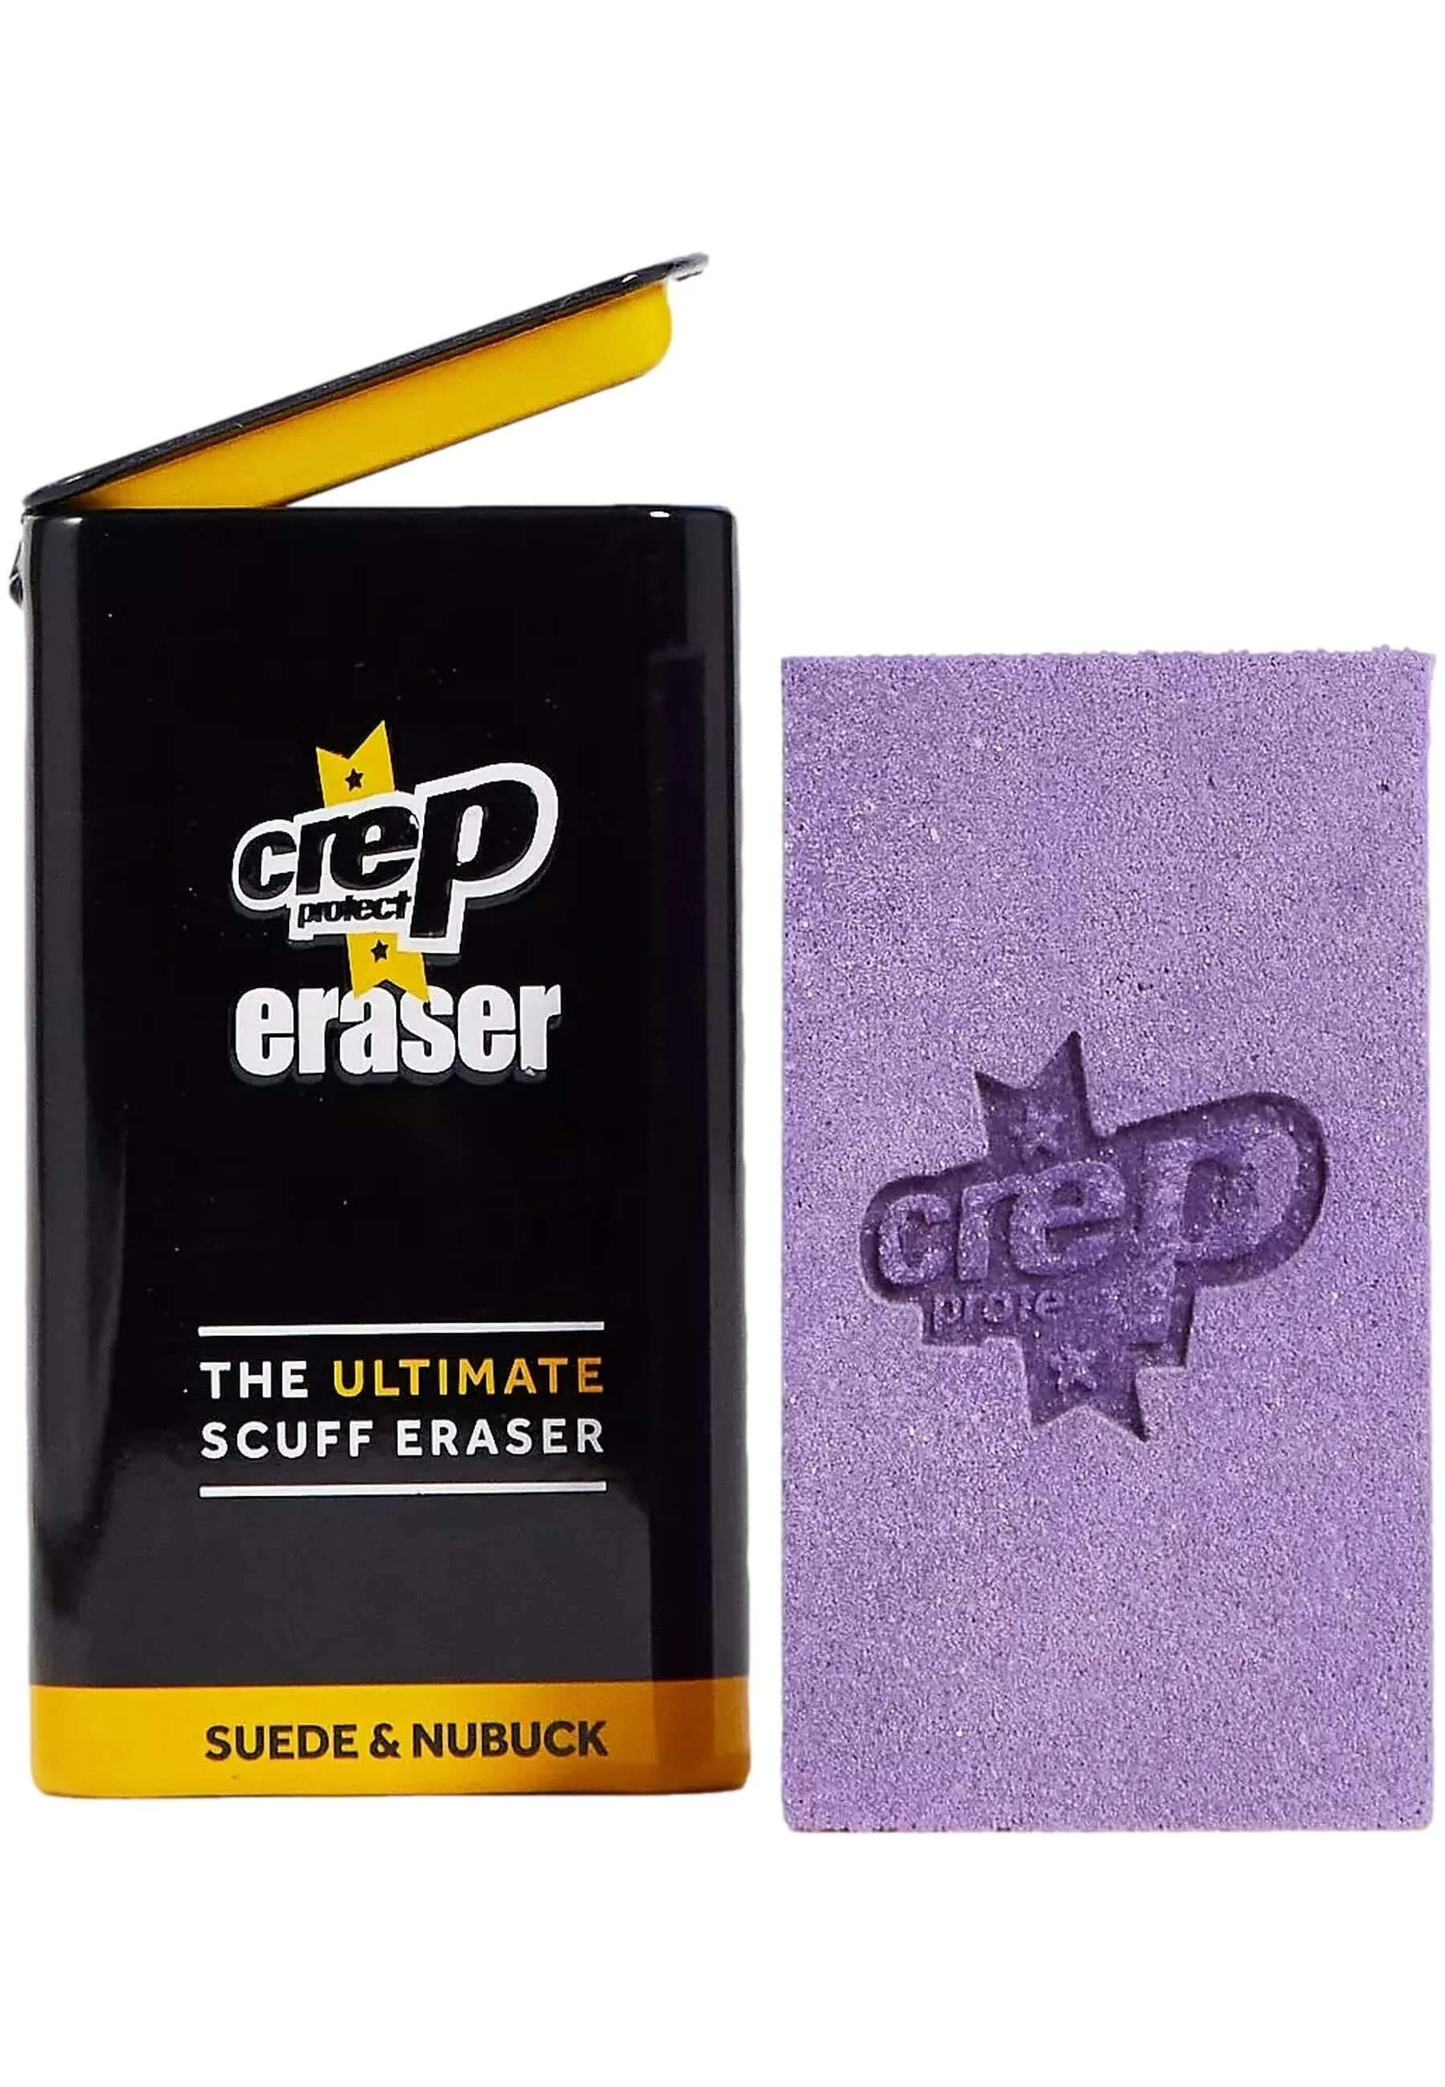 Crep Protect Eraser - Suede and Nubuck